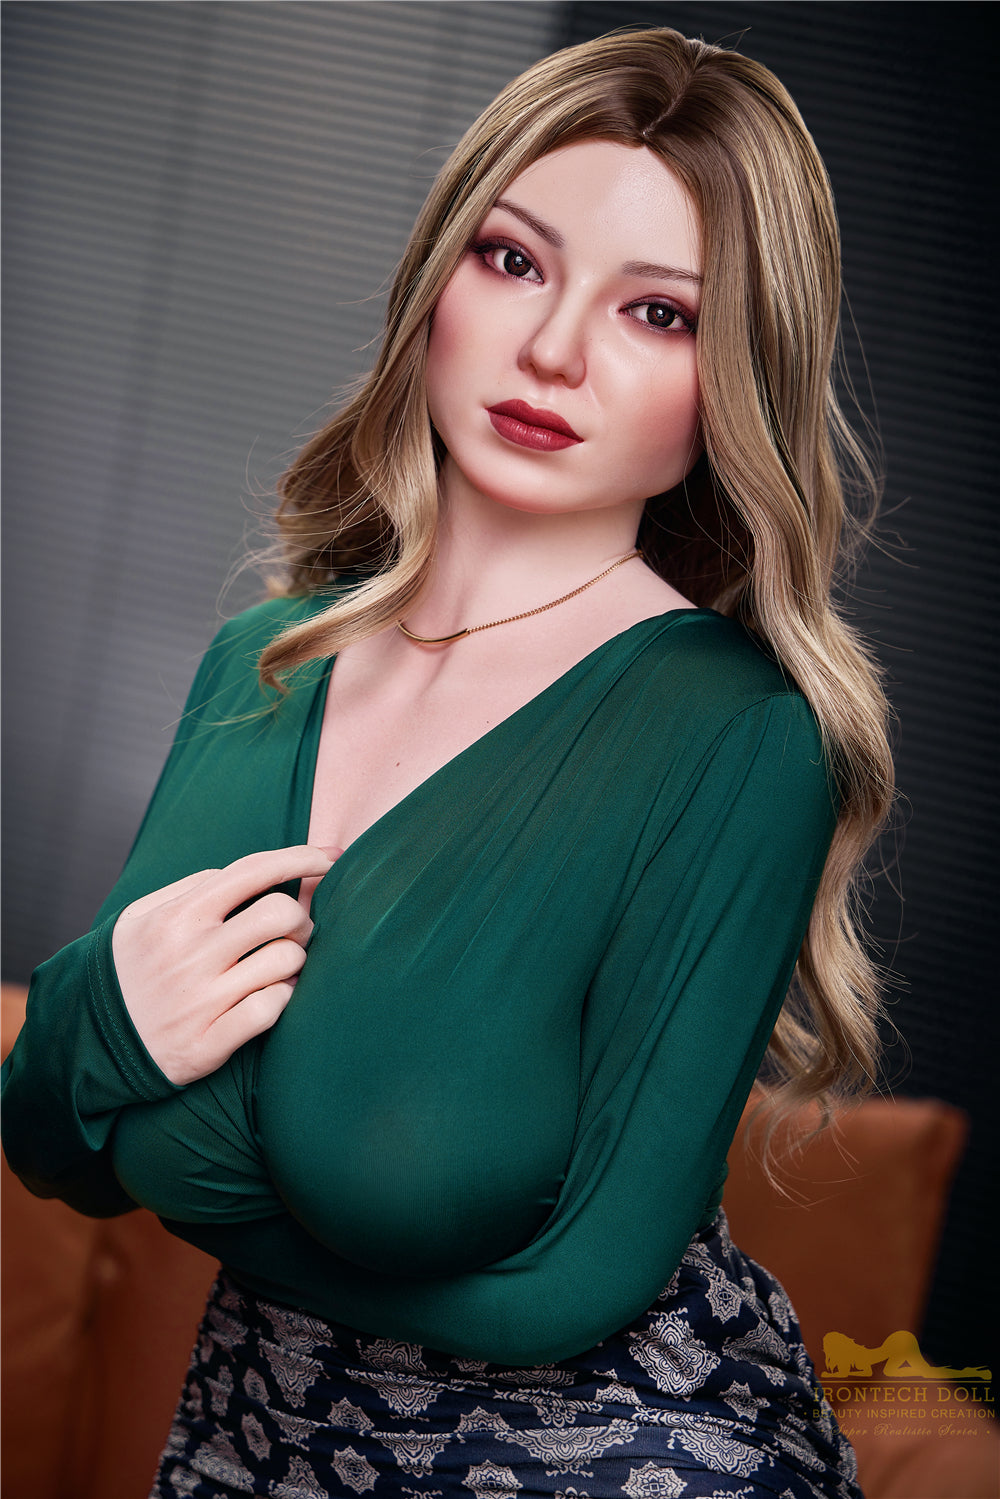 Irontech Premium Full Silicone Love Sex Doll Super Realistic Series- Cailyn 162cm